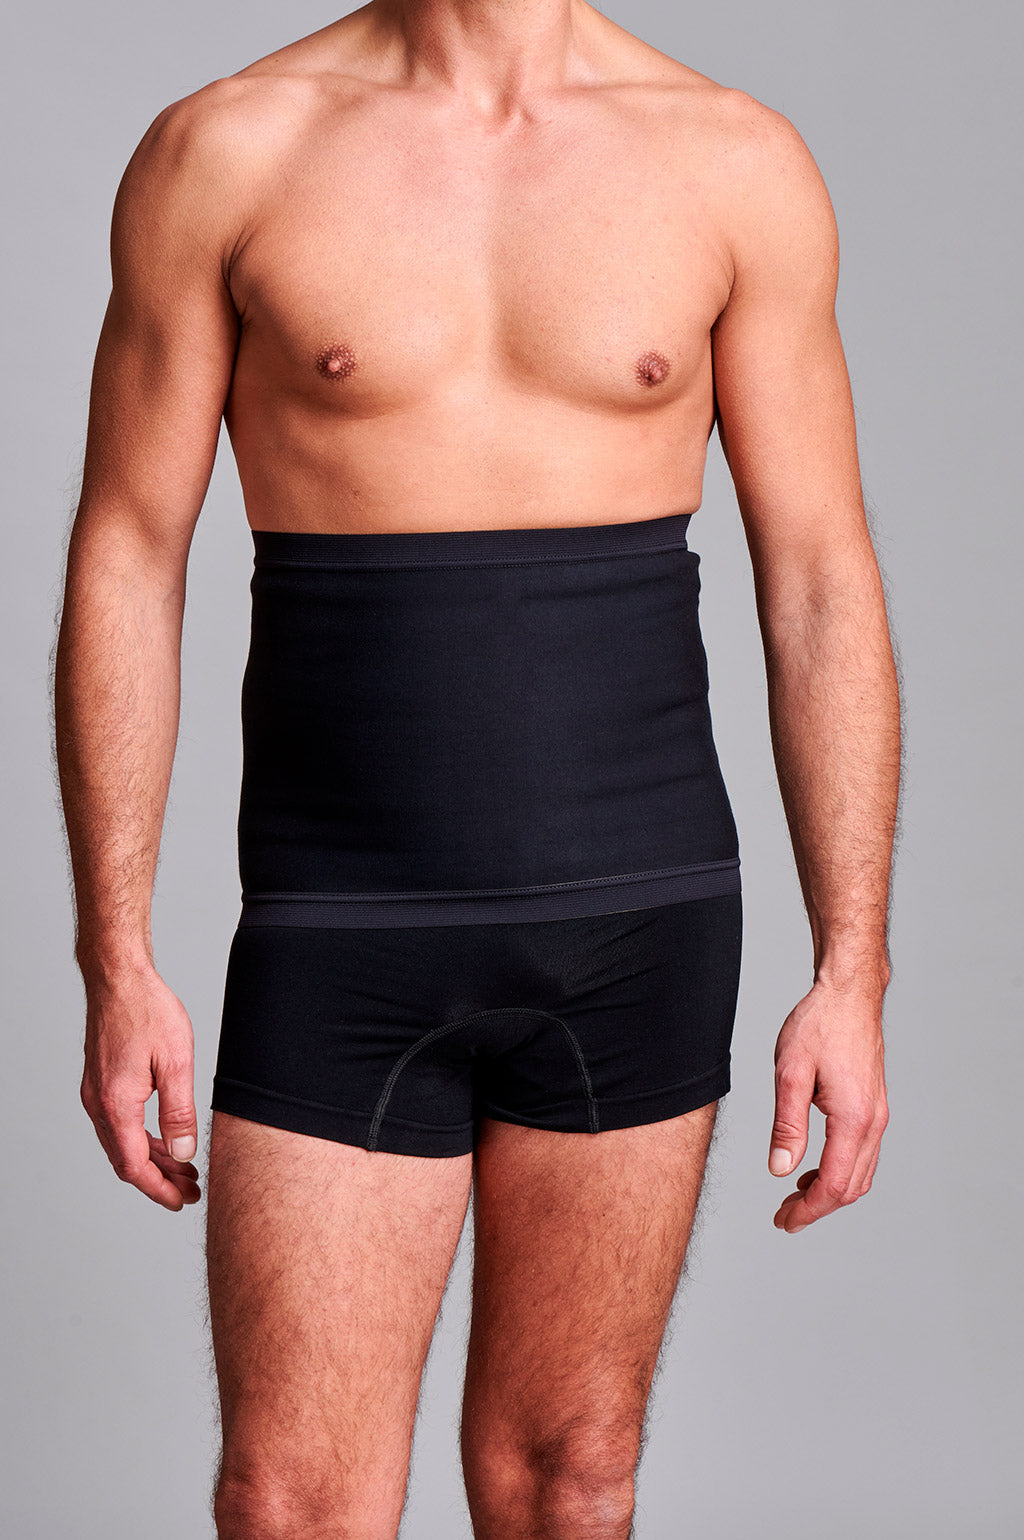 CUI Wear on X: Why buy 1 when you can have 3 for a discount. Across our  Men's and Women's Ostomy Underwear range. We ship worldwide 🌎   #ostomy #ostomyunderwear #whatostomateswear #stoma #